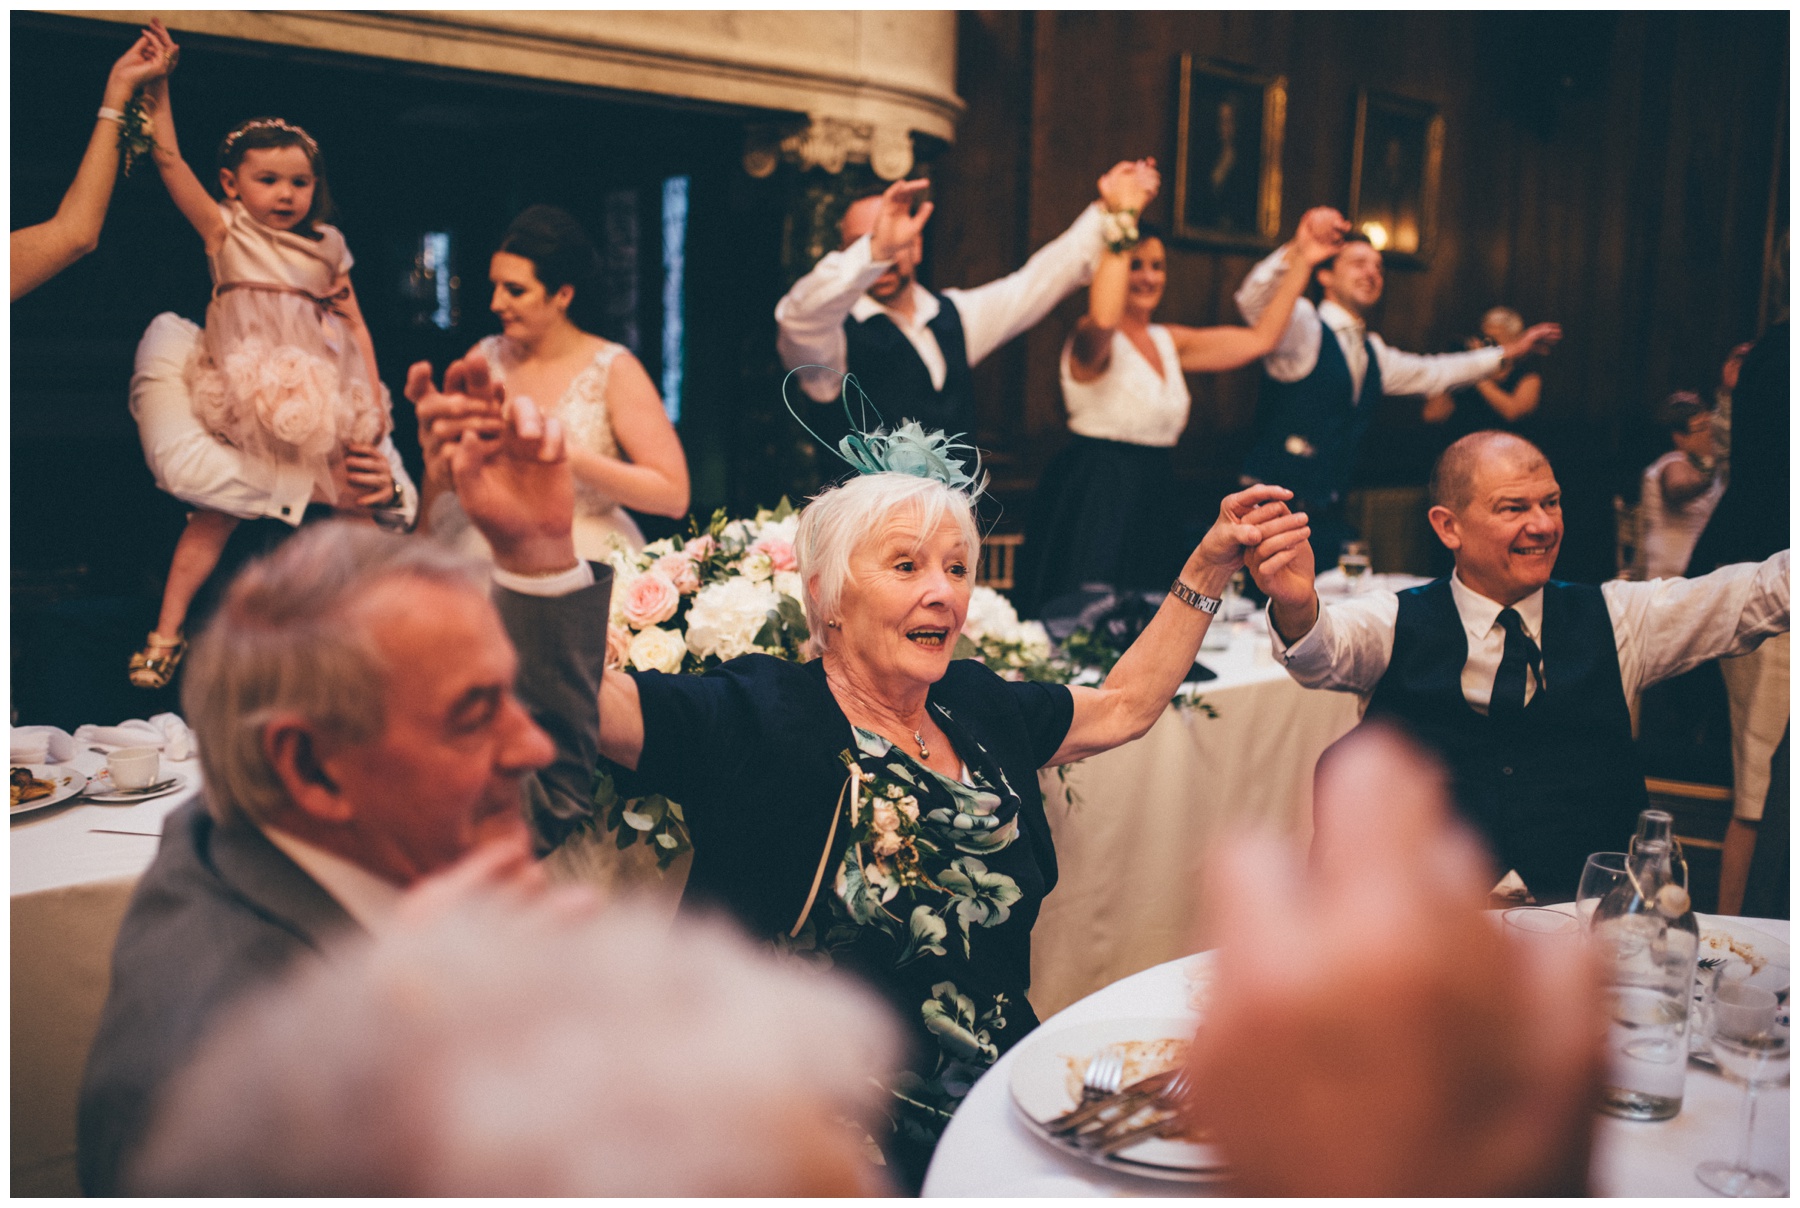 The singing waiters at Thornton Manor wedding get all the wedding guests dancing during the meal and speeches.